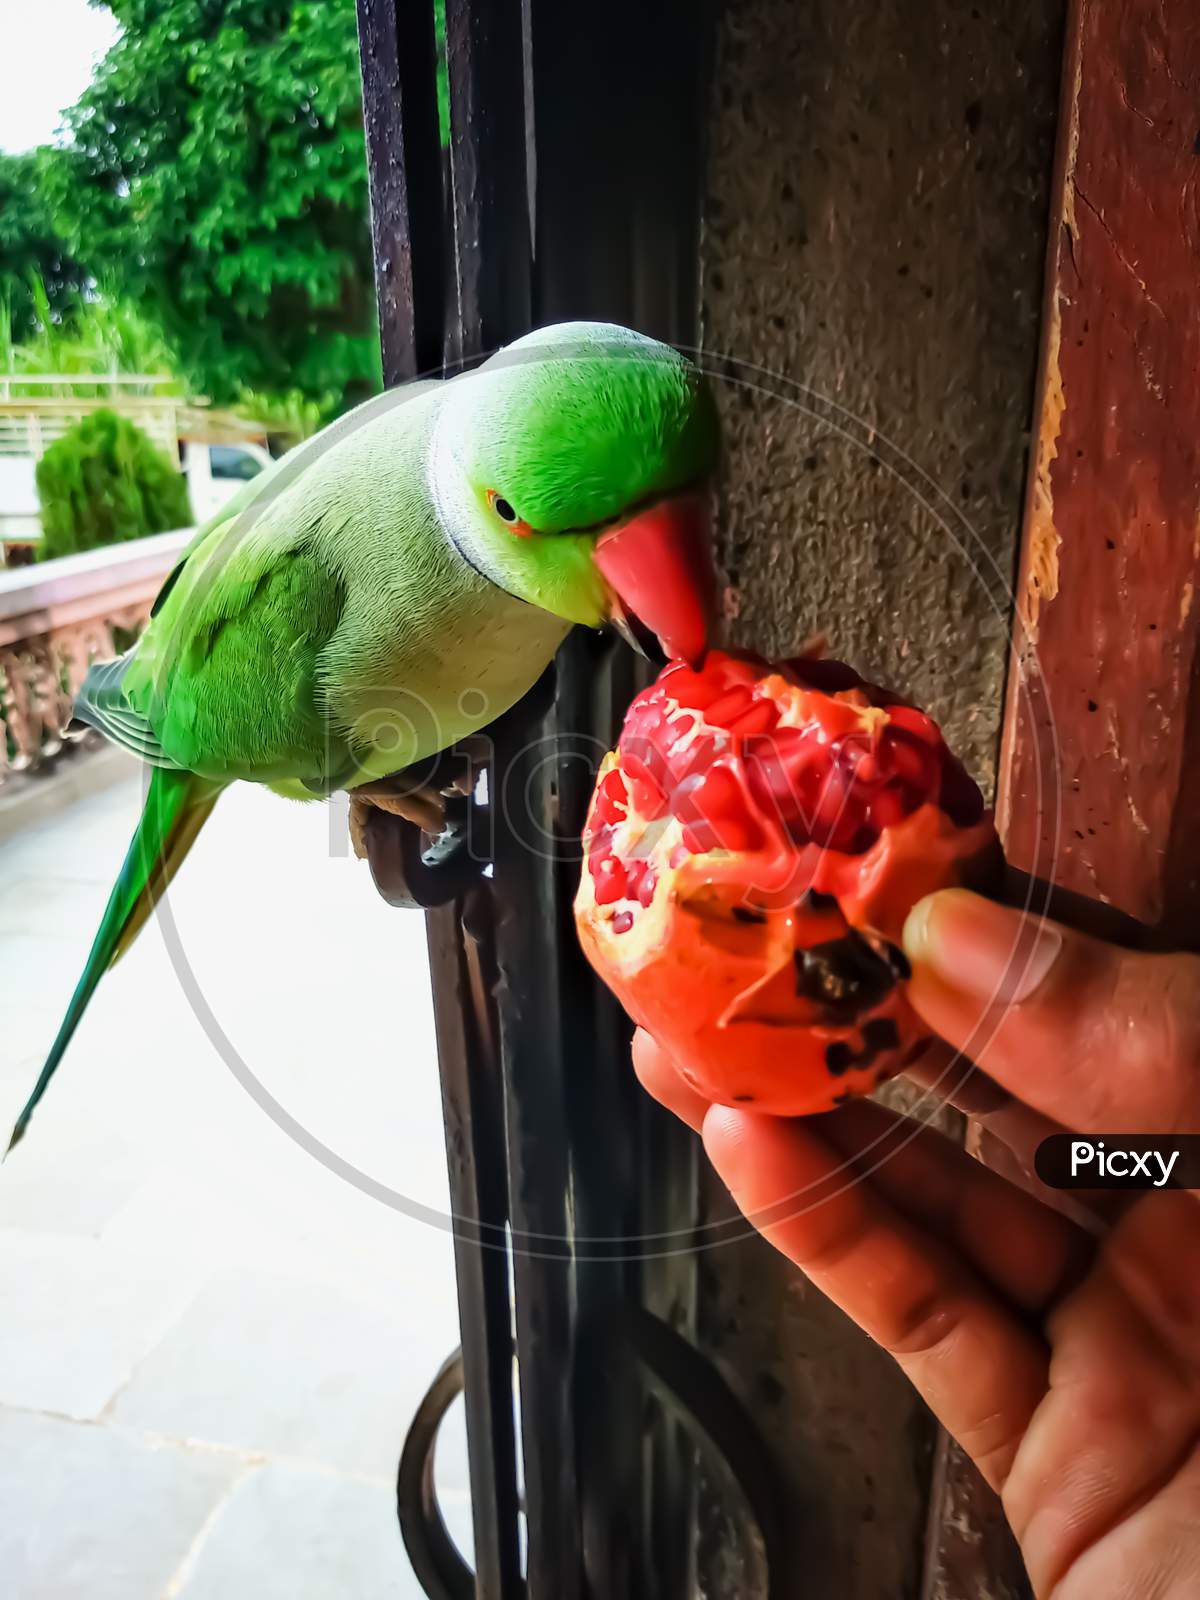 The parrot bird sitting on the door and eating pomegranate.